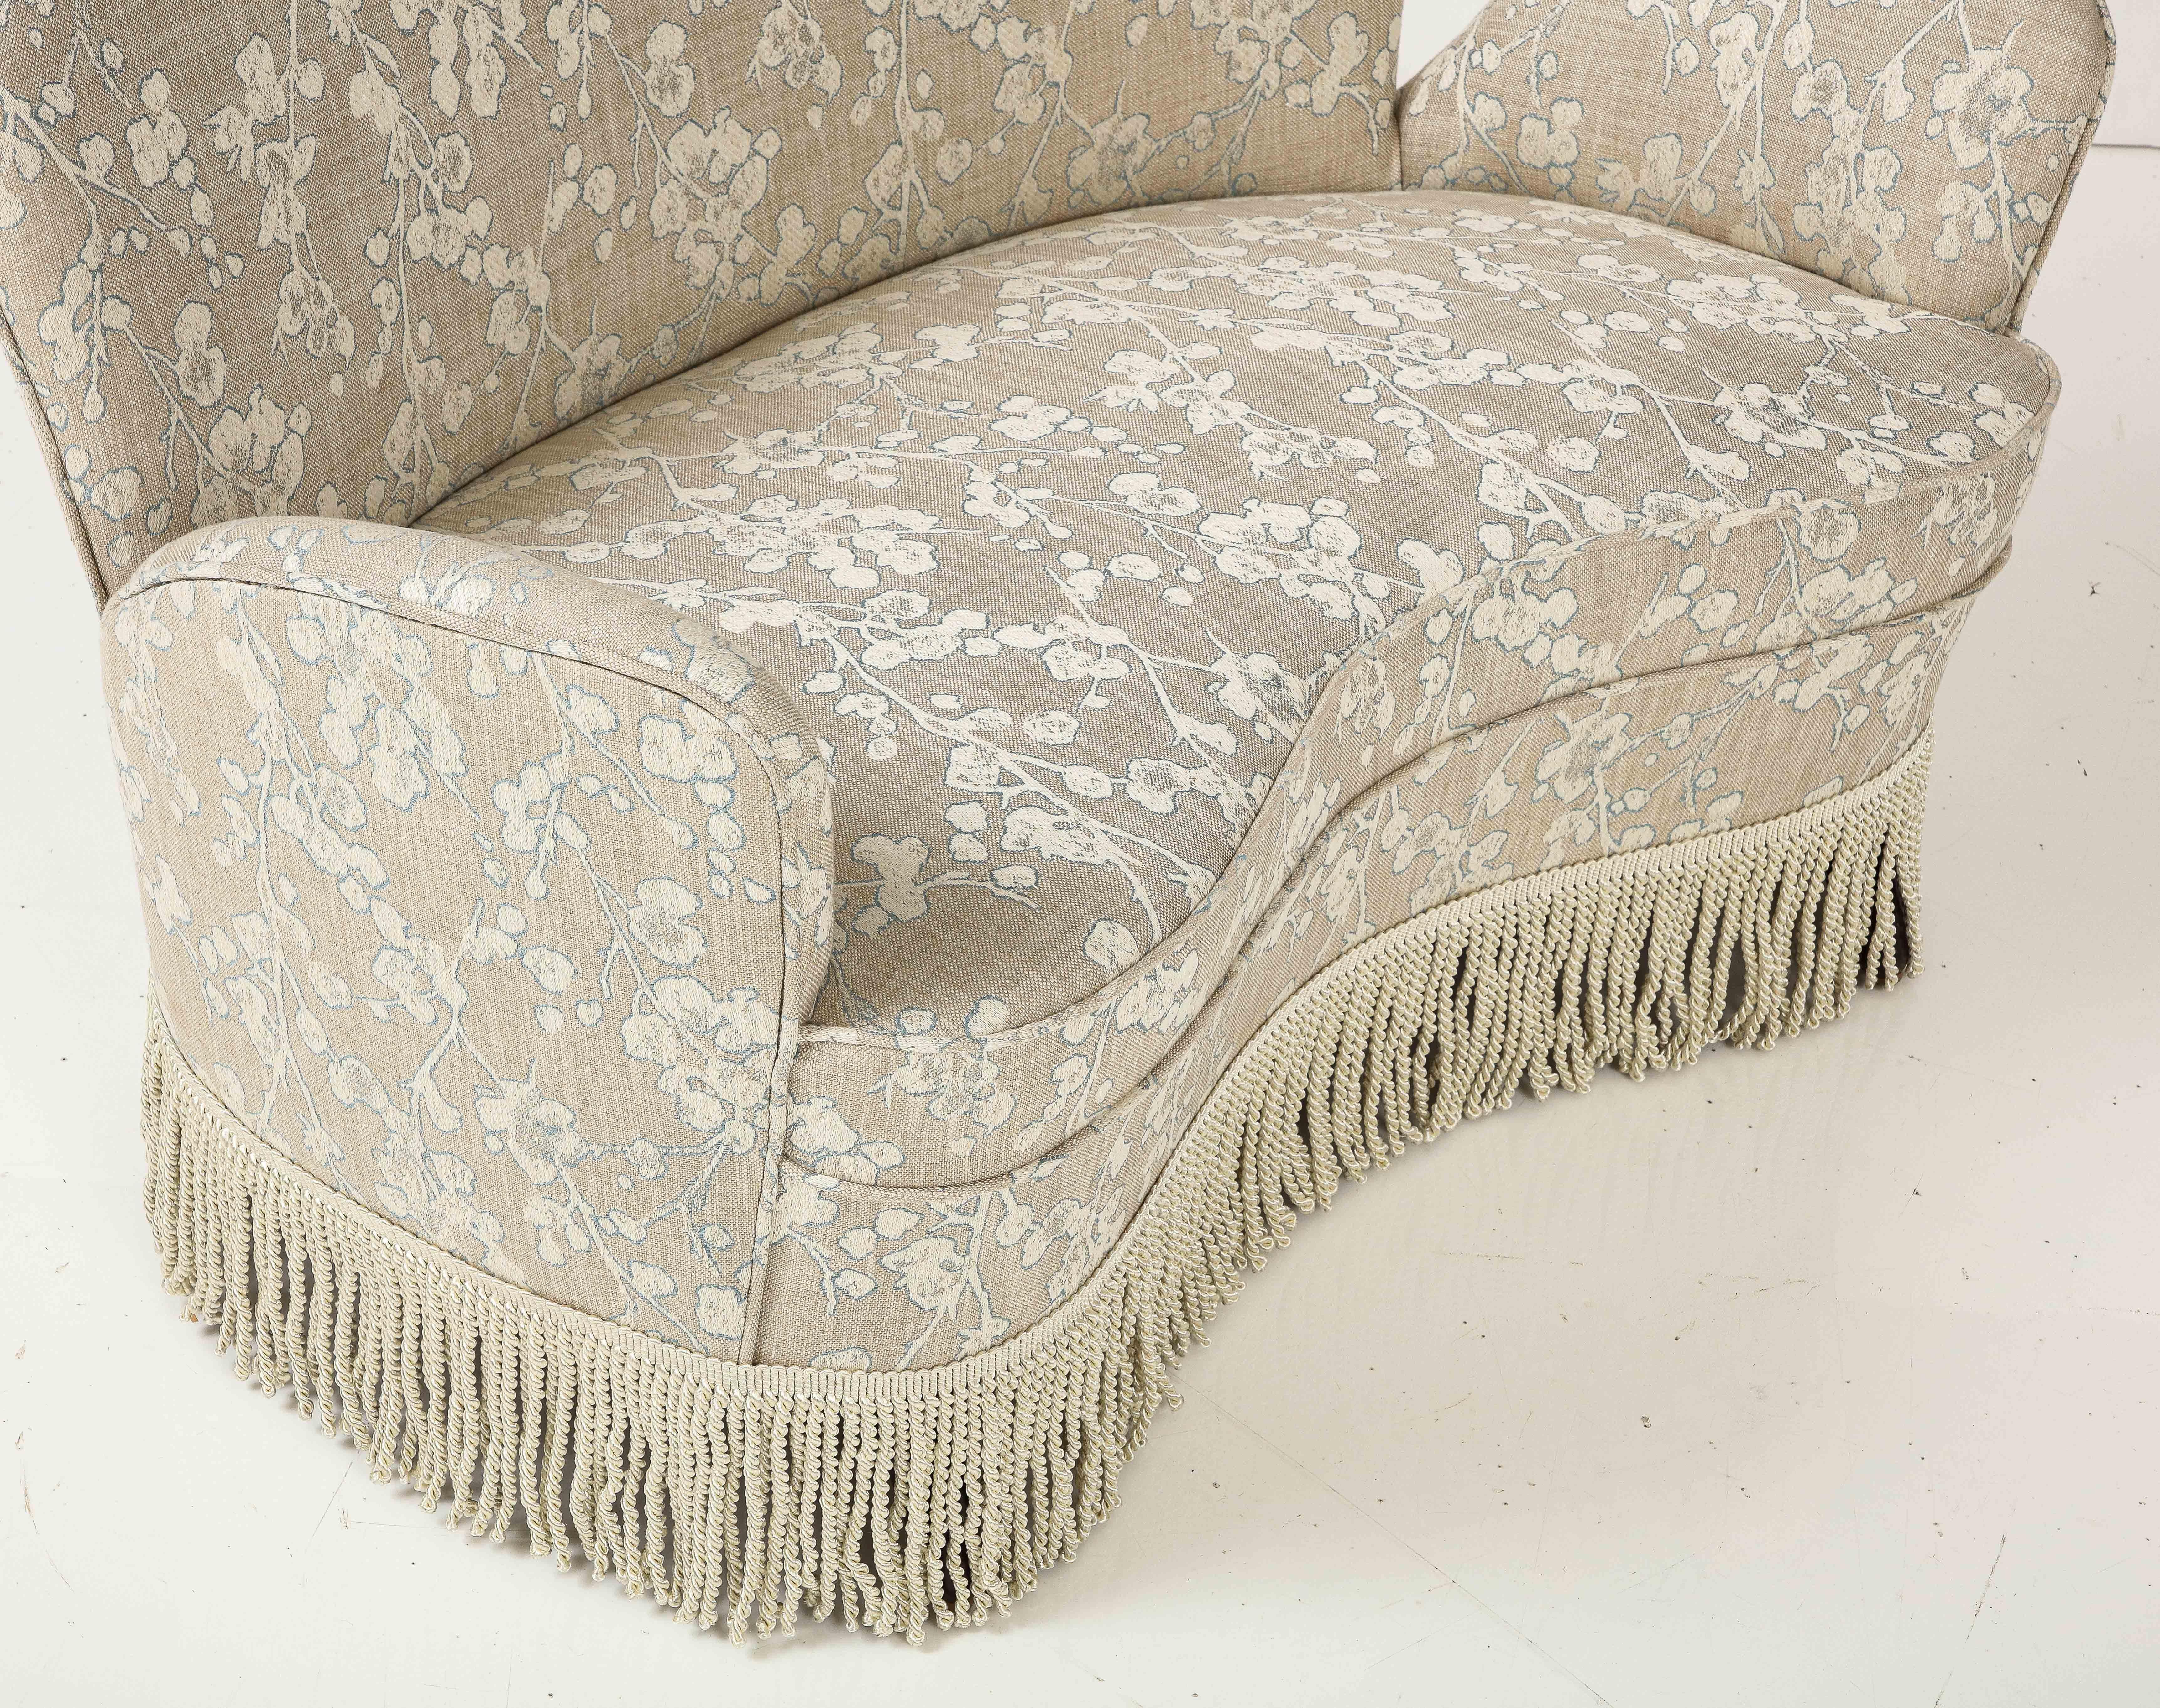 Upholstery Sculptural Italian Midcentury Upholstered Loveseat / Chair by Fede Cheti  For Sale